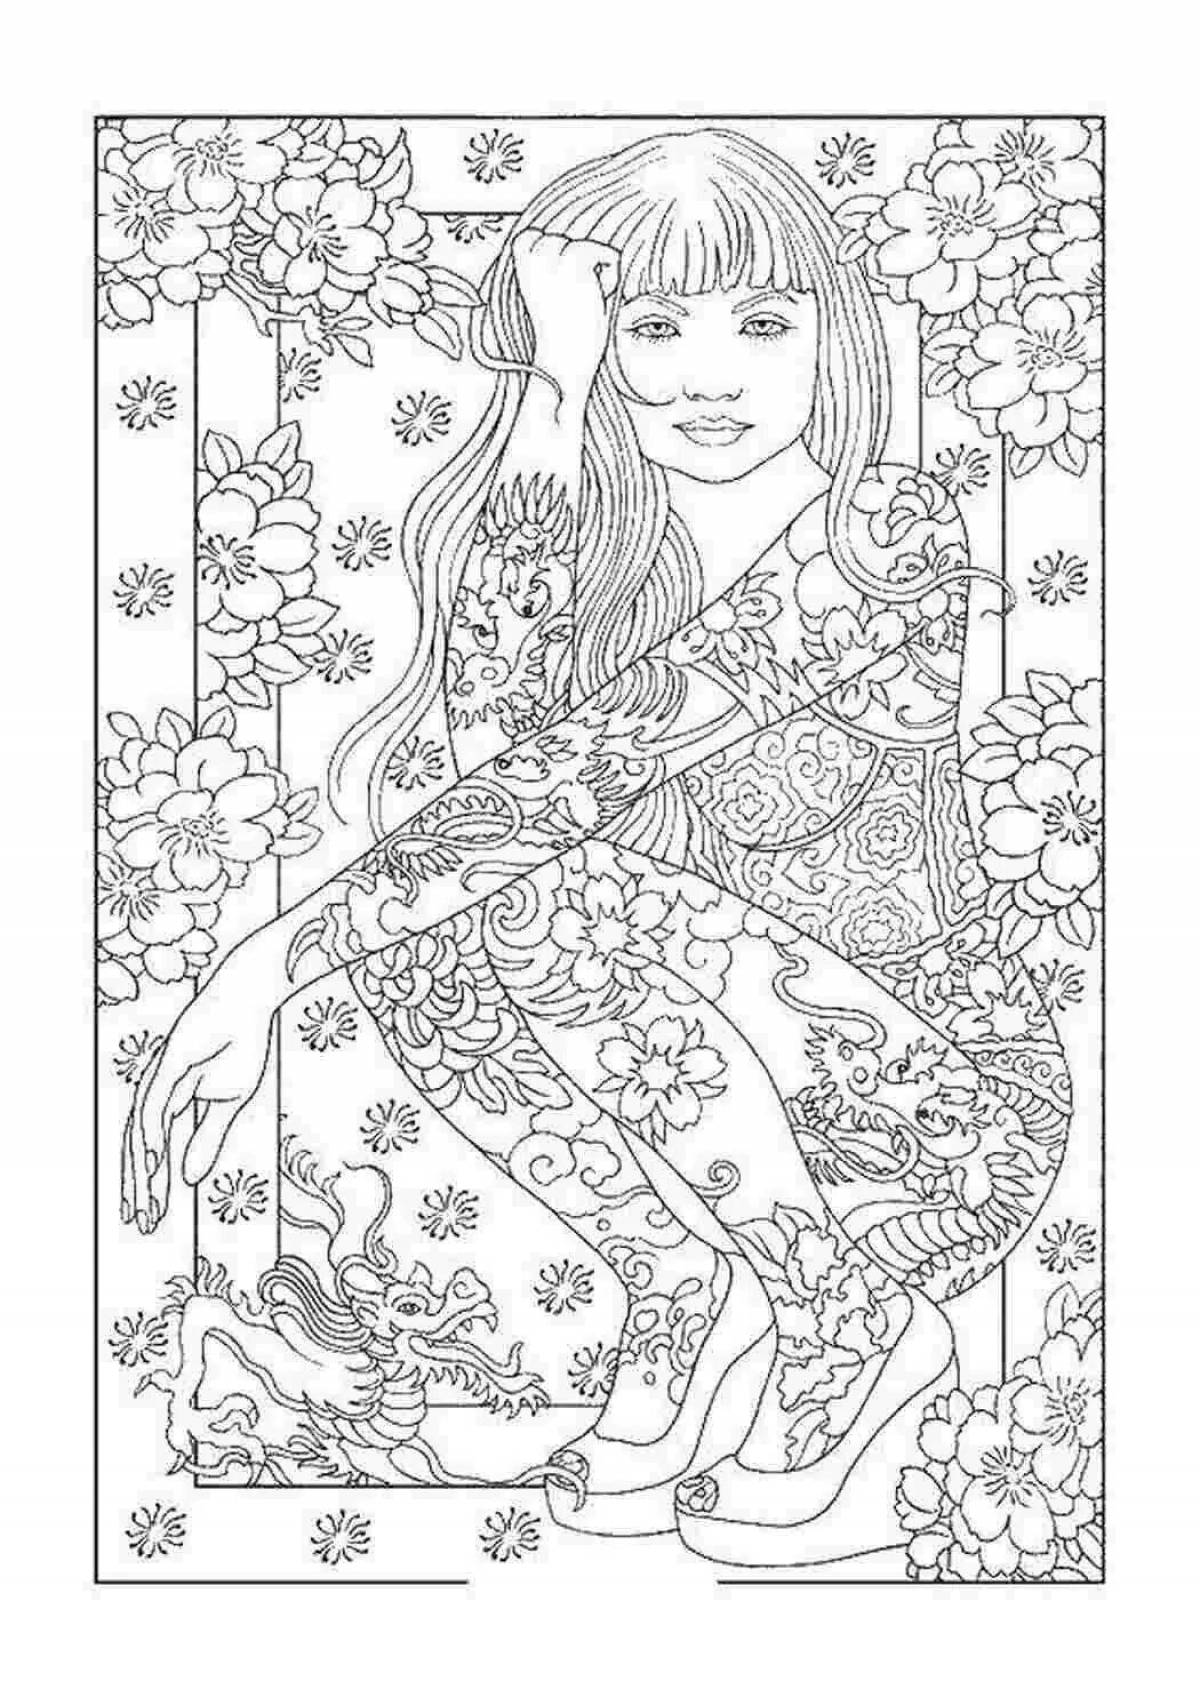 Intriguing coloring book for 11 years for girls